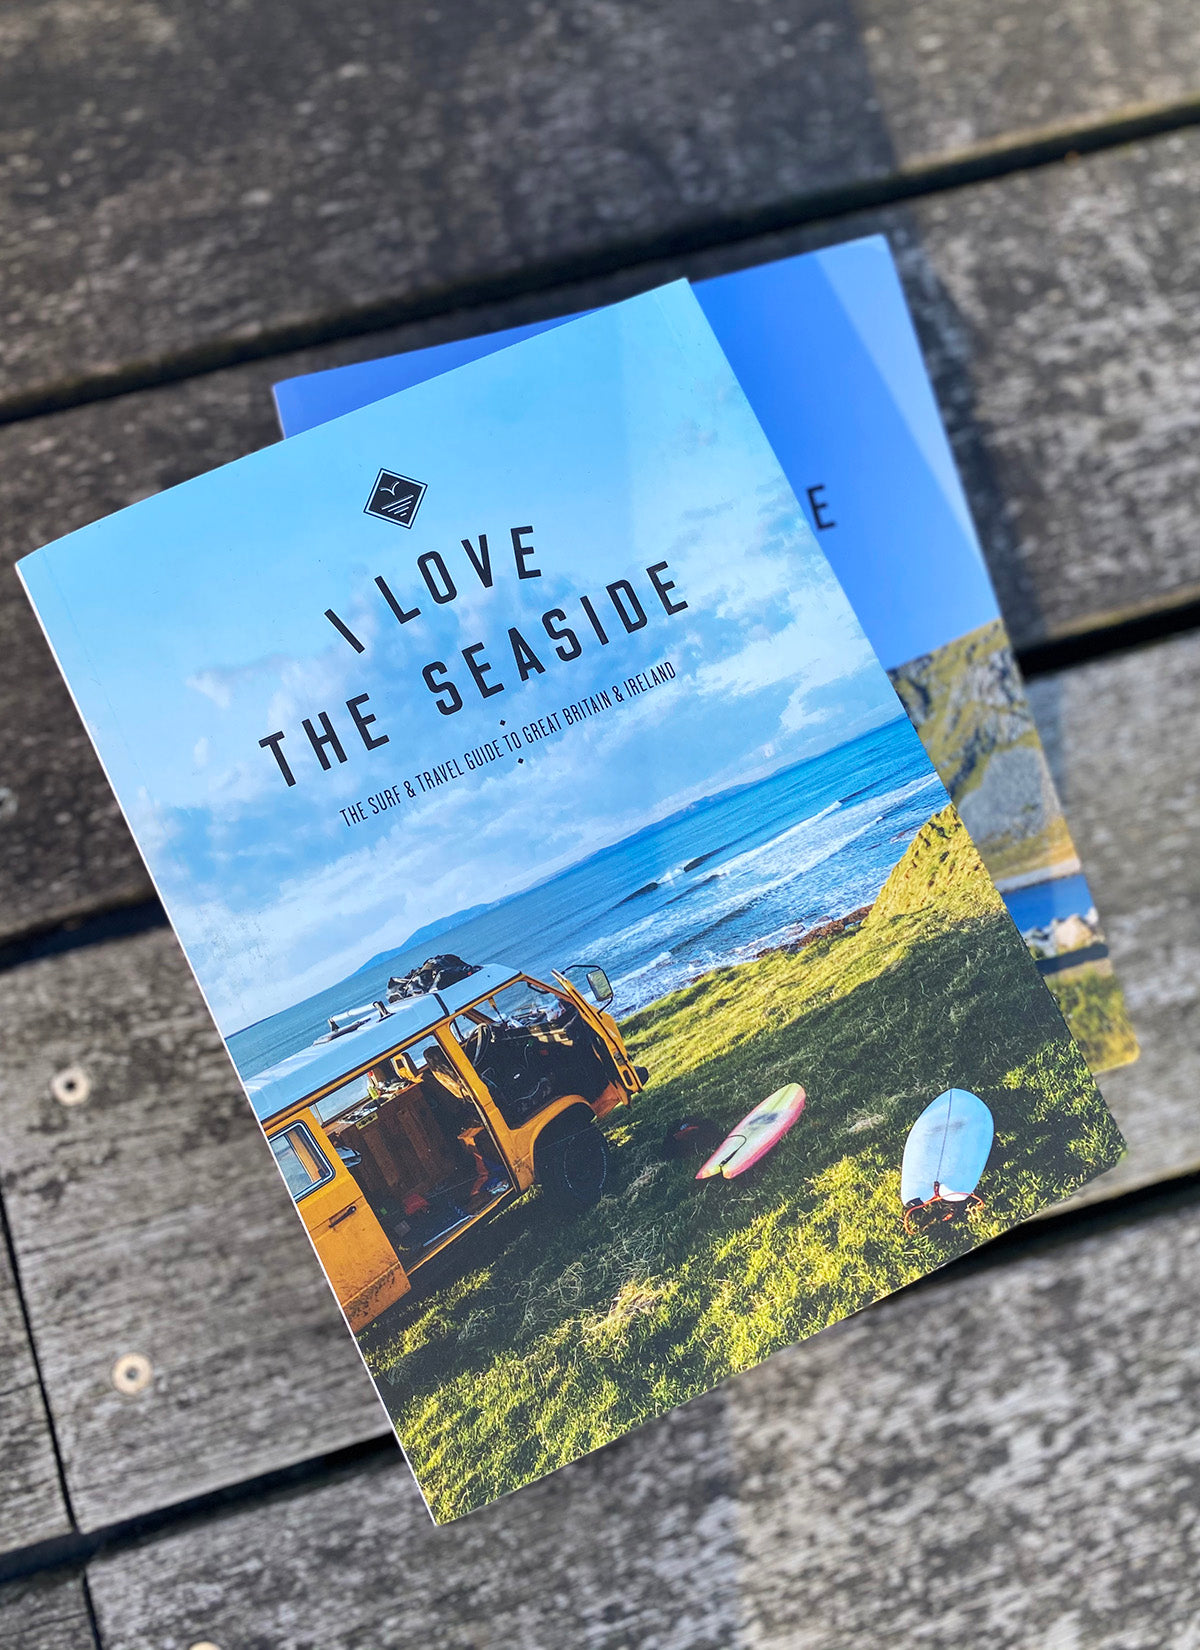 Surf & Travel Guide "I Love the Seaside" - Great Britain & Ireland